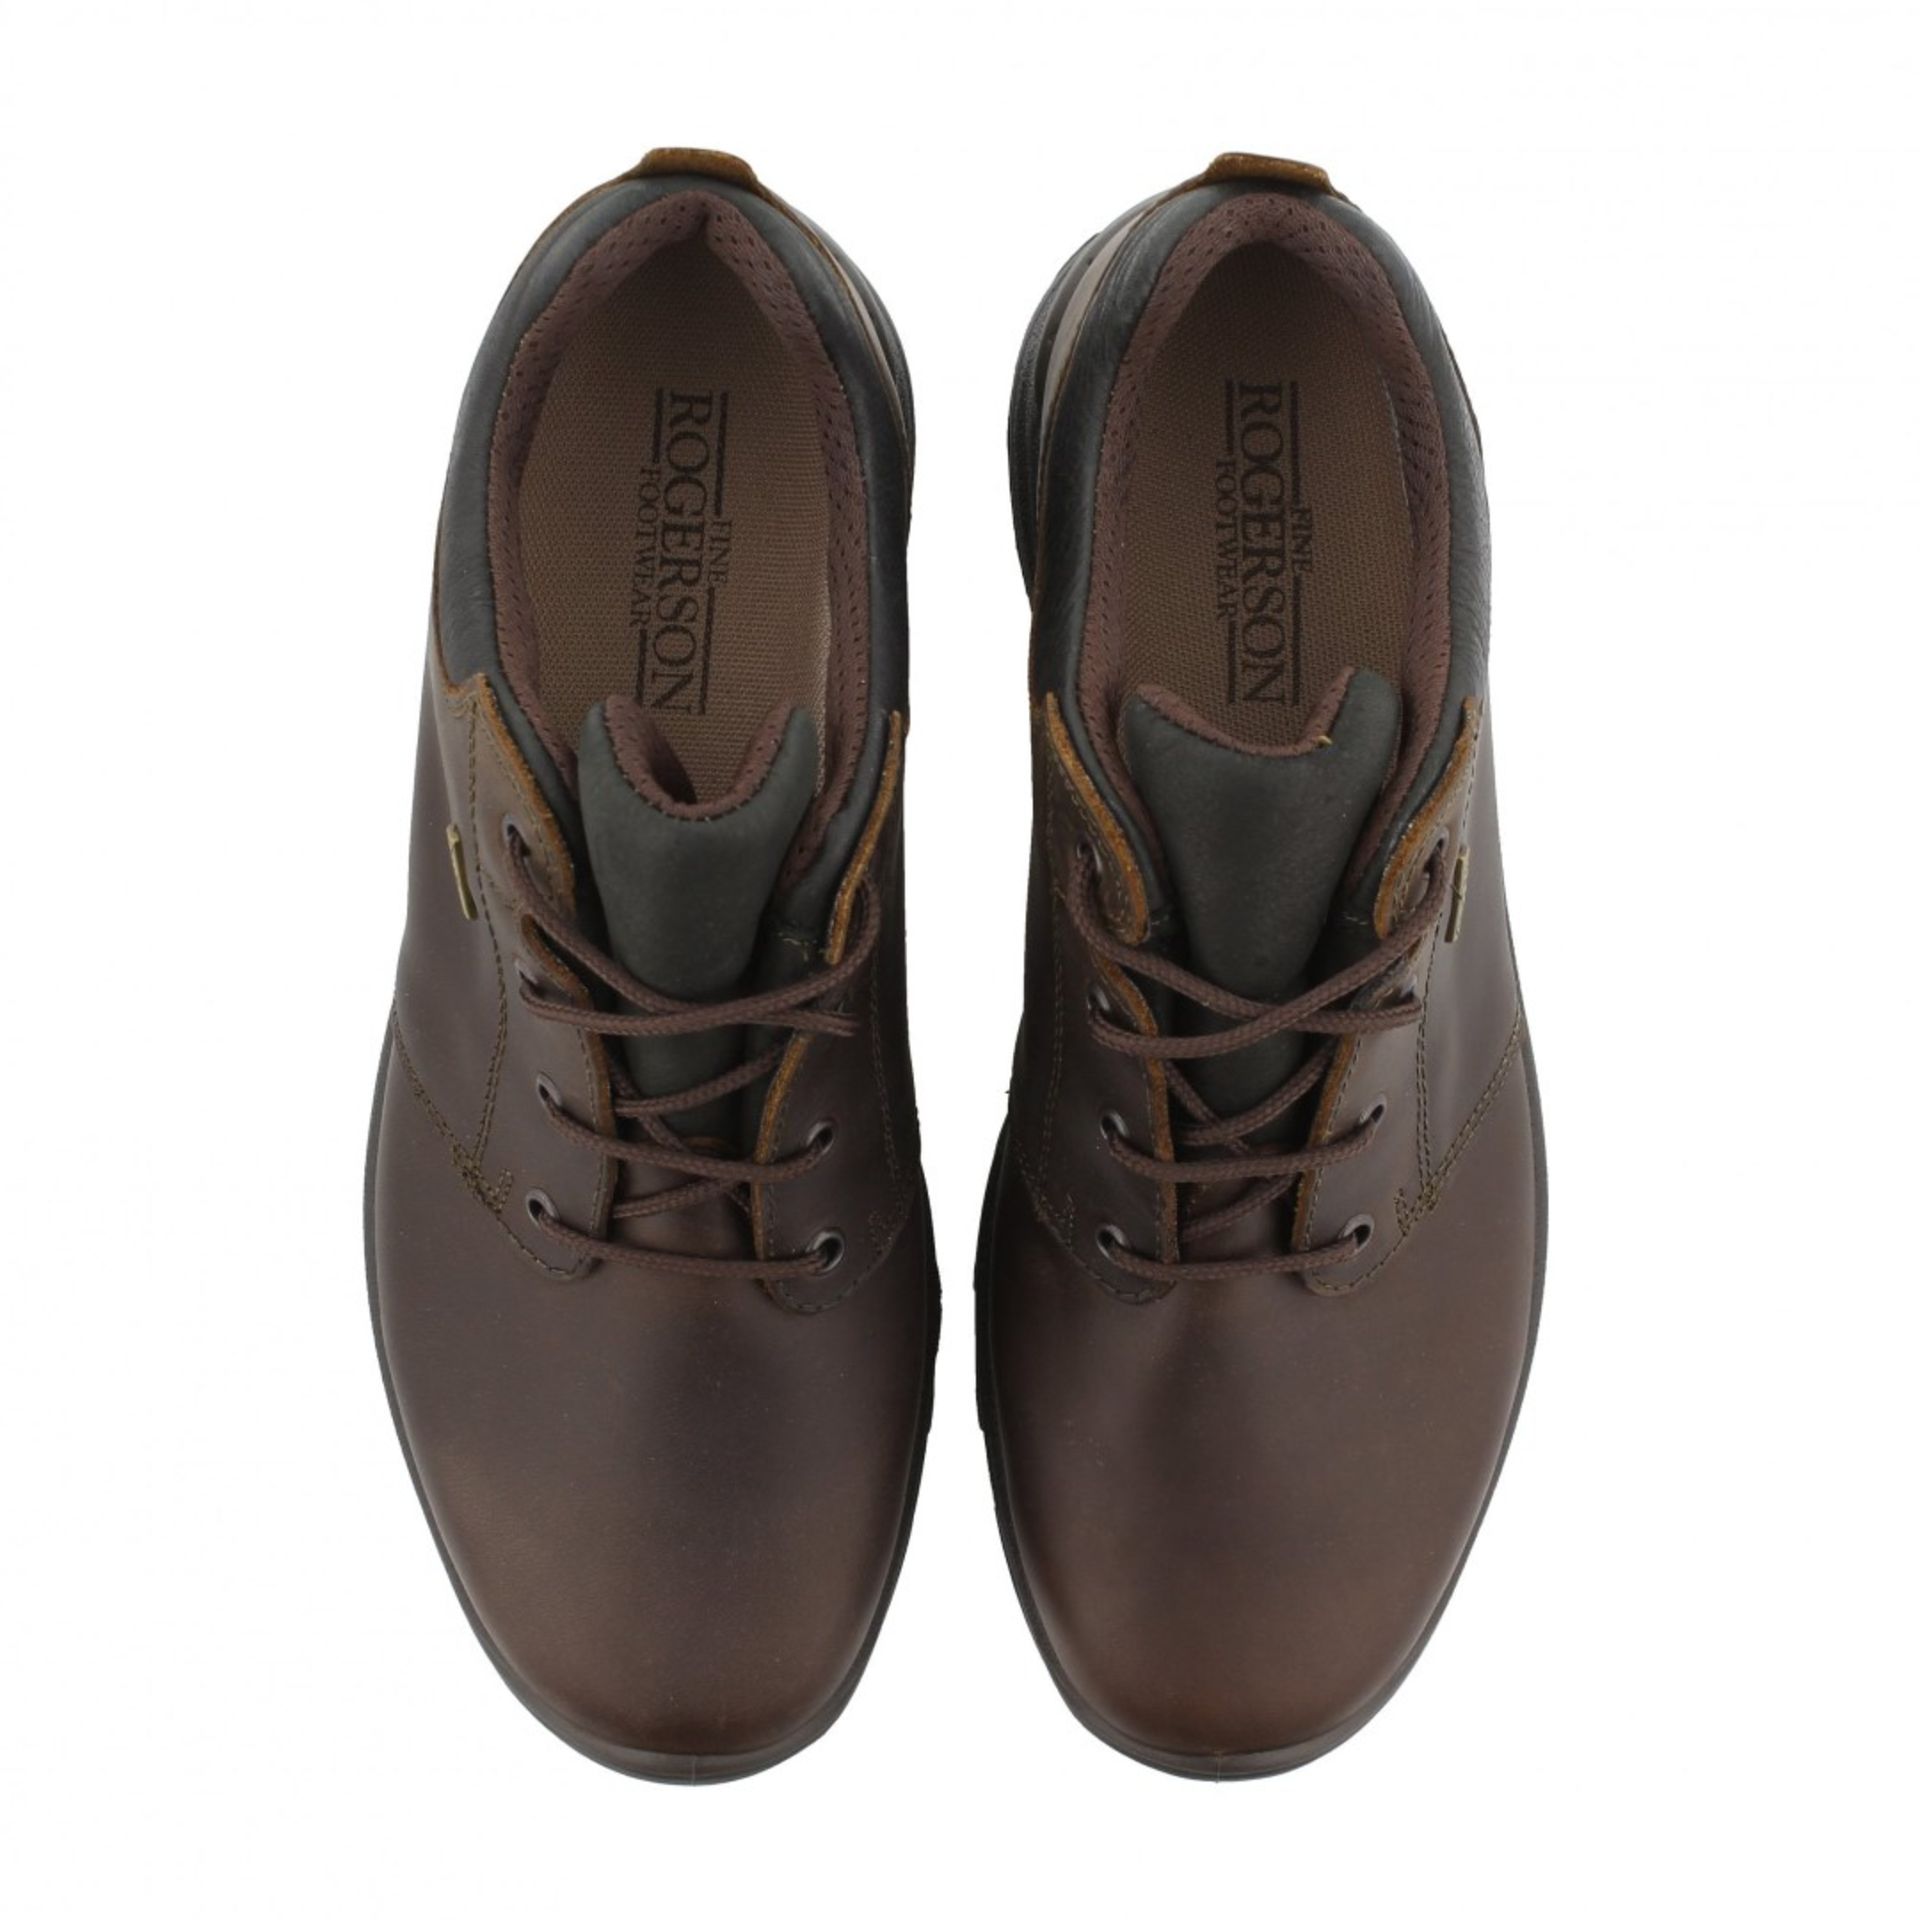 1 x Pair of Men's Grisport Brown Leather GriTex Shoes - Rogerson Footwear - Brand New and Boxed - - Image 6 of 10